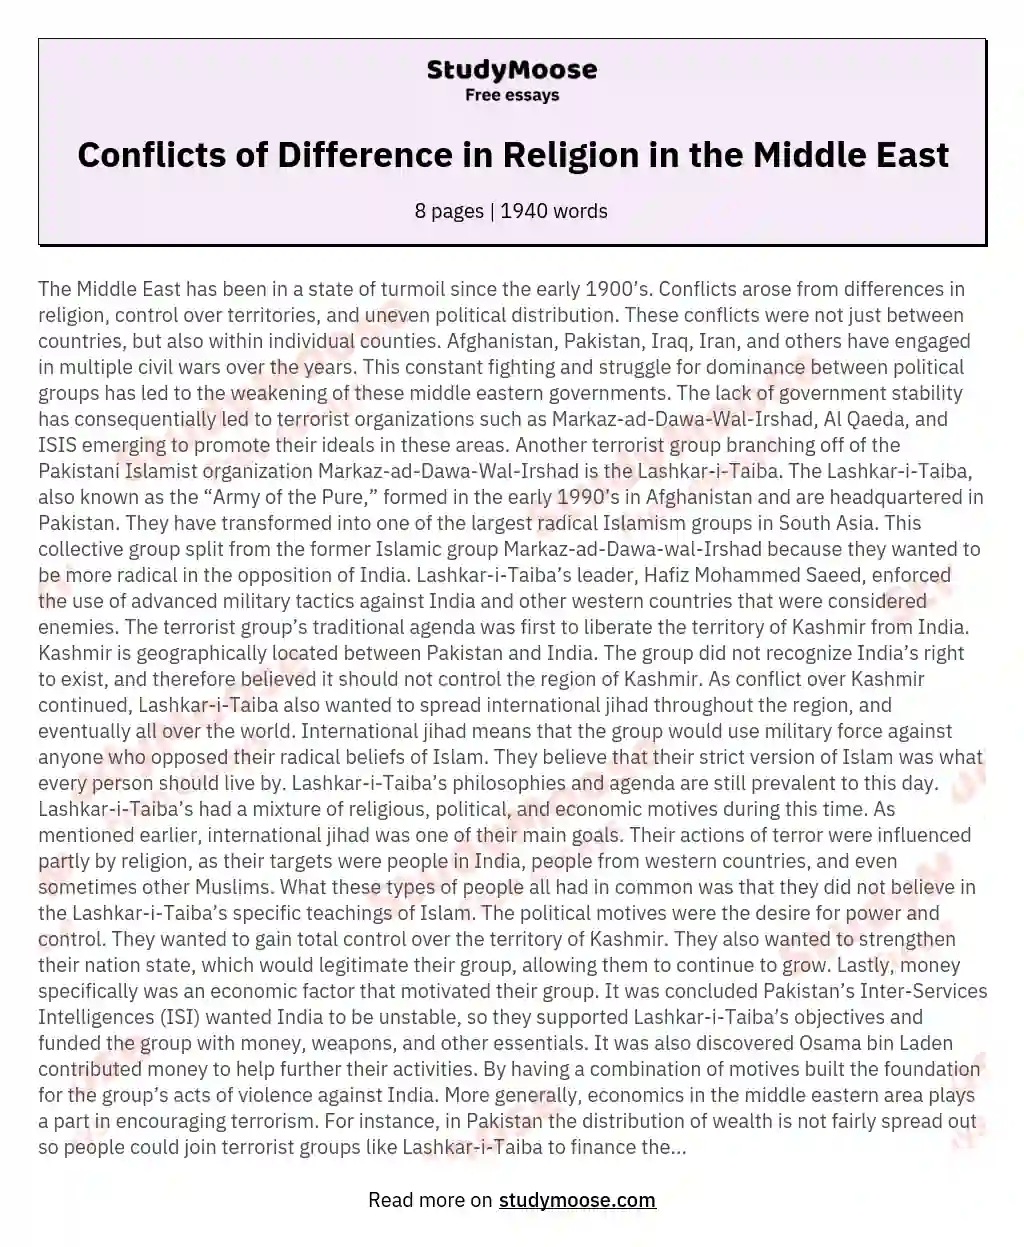 Conflicts of Difference in Religion in the Middle East essay